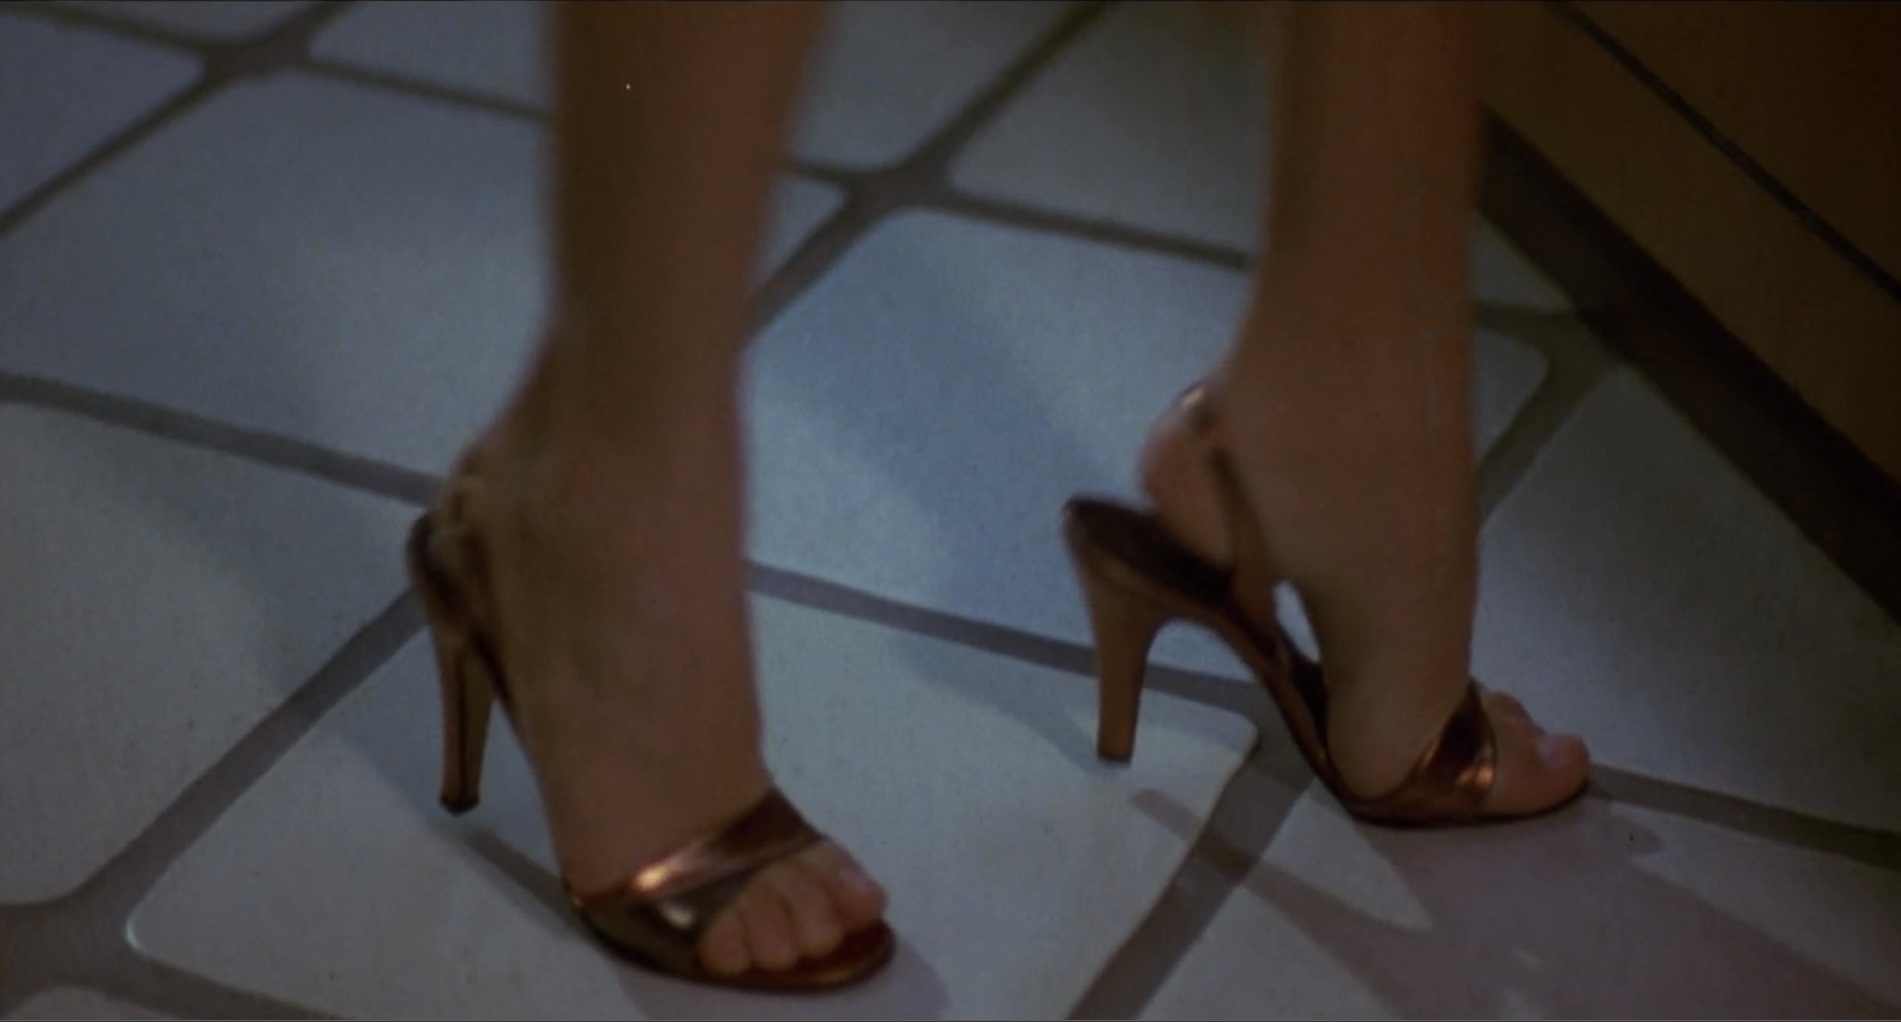 Click to enlarge picture id 546347 of Catherine Mary Stewart's Feet.